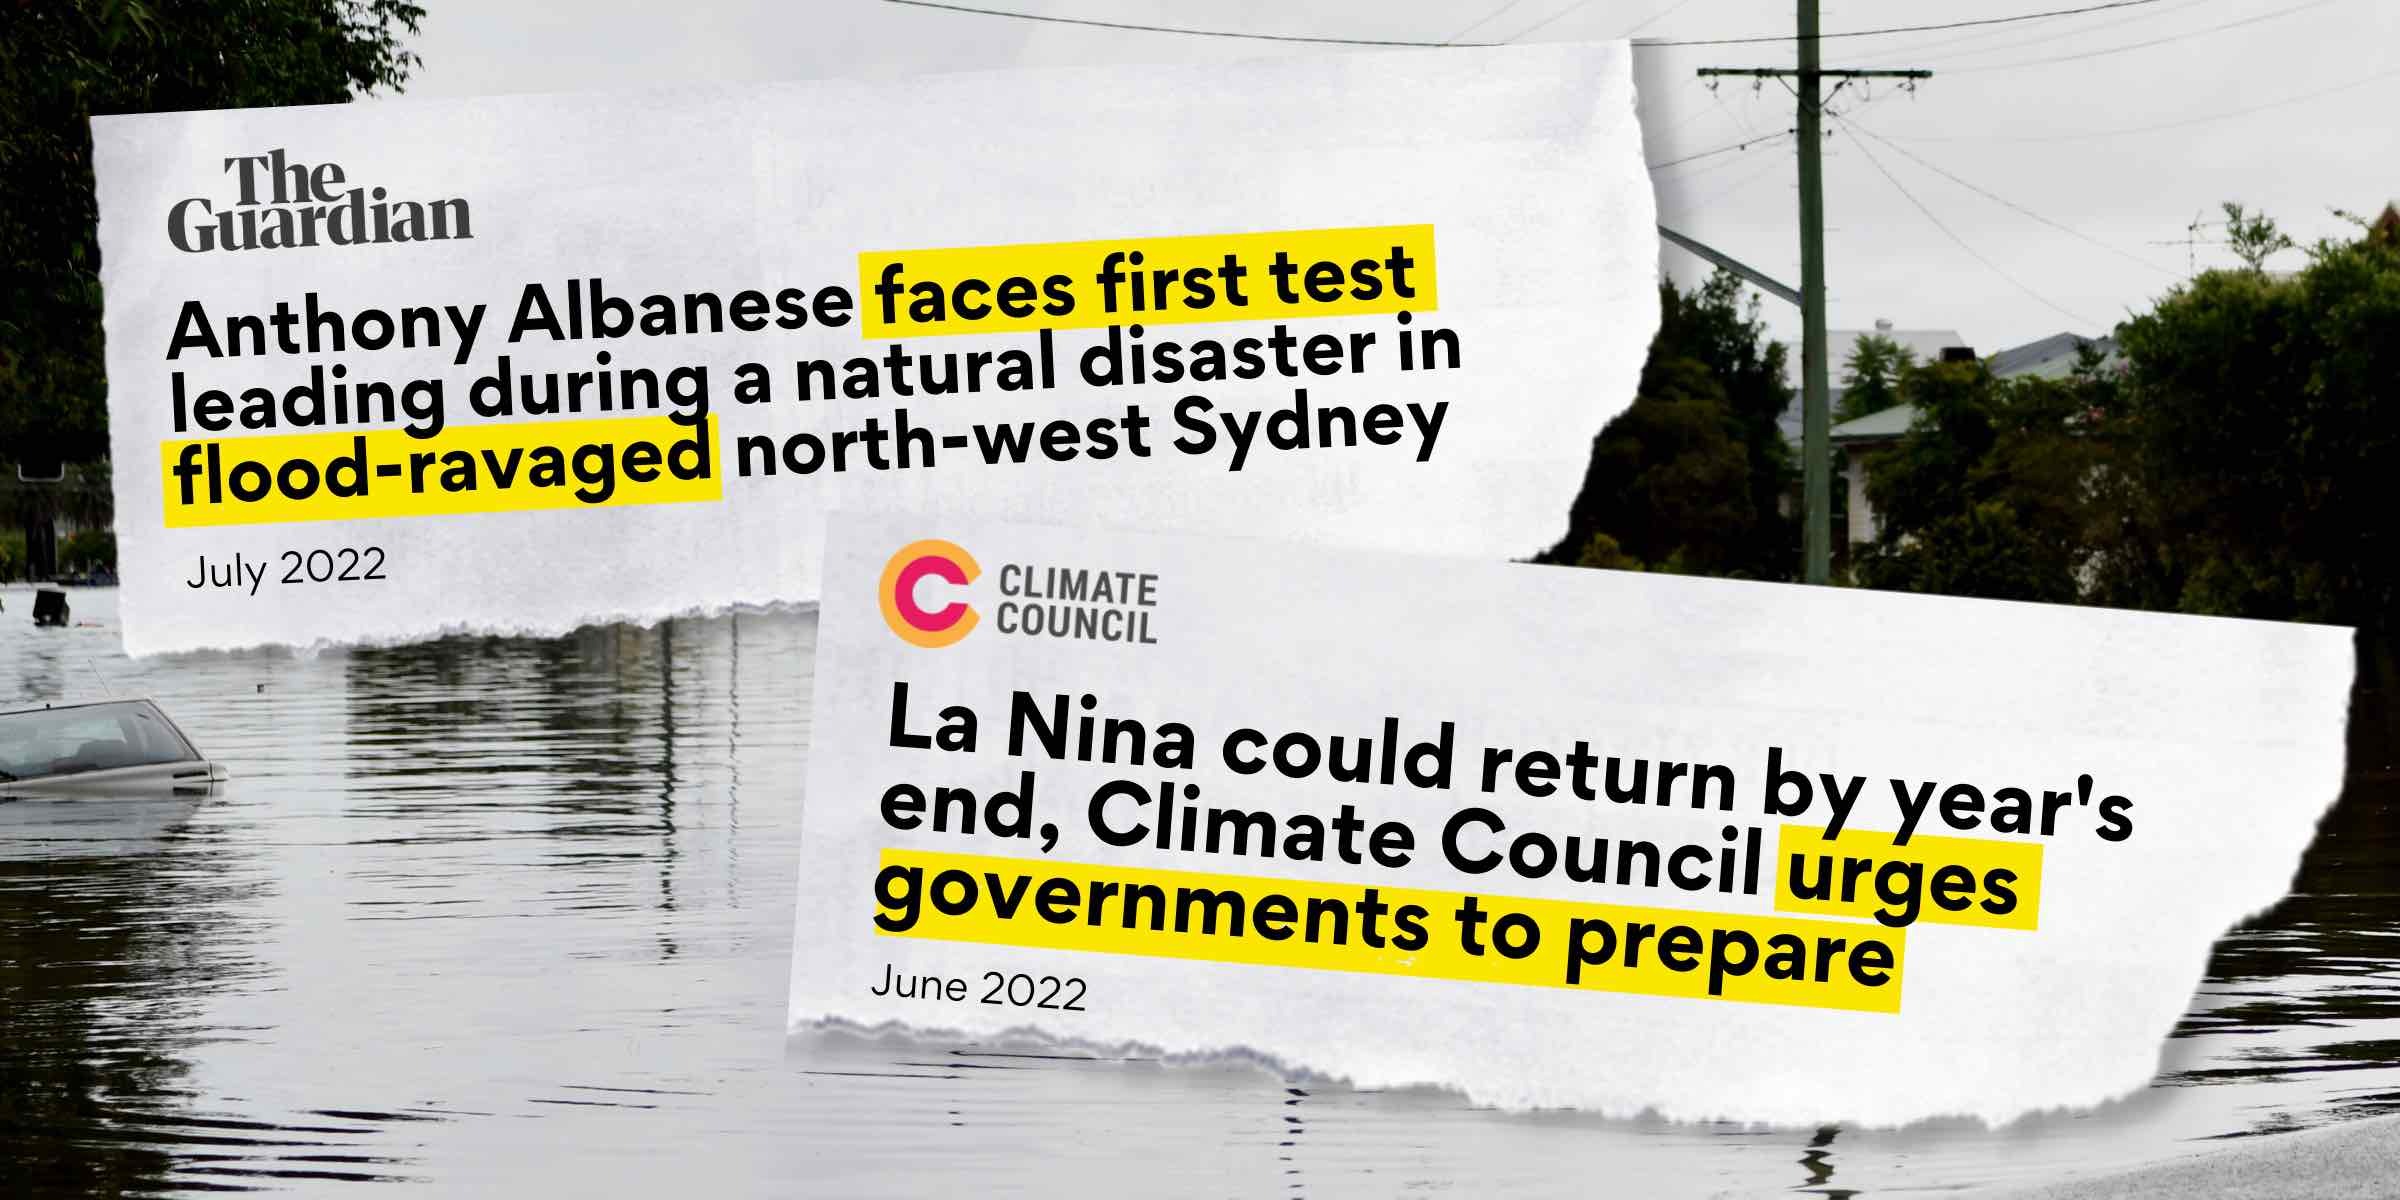 Headlines reading: Anthony Albanese faces first test leading during natural disaster in flood-ravaged north-west Sydney, and Albanese, Perrotet unite to get flood money out the door